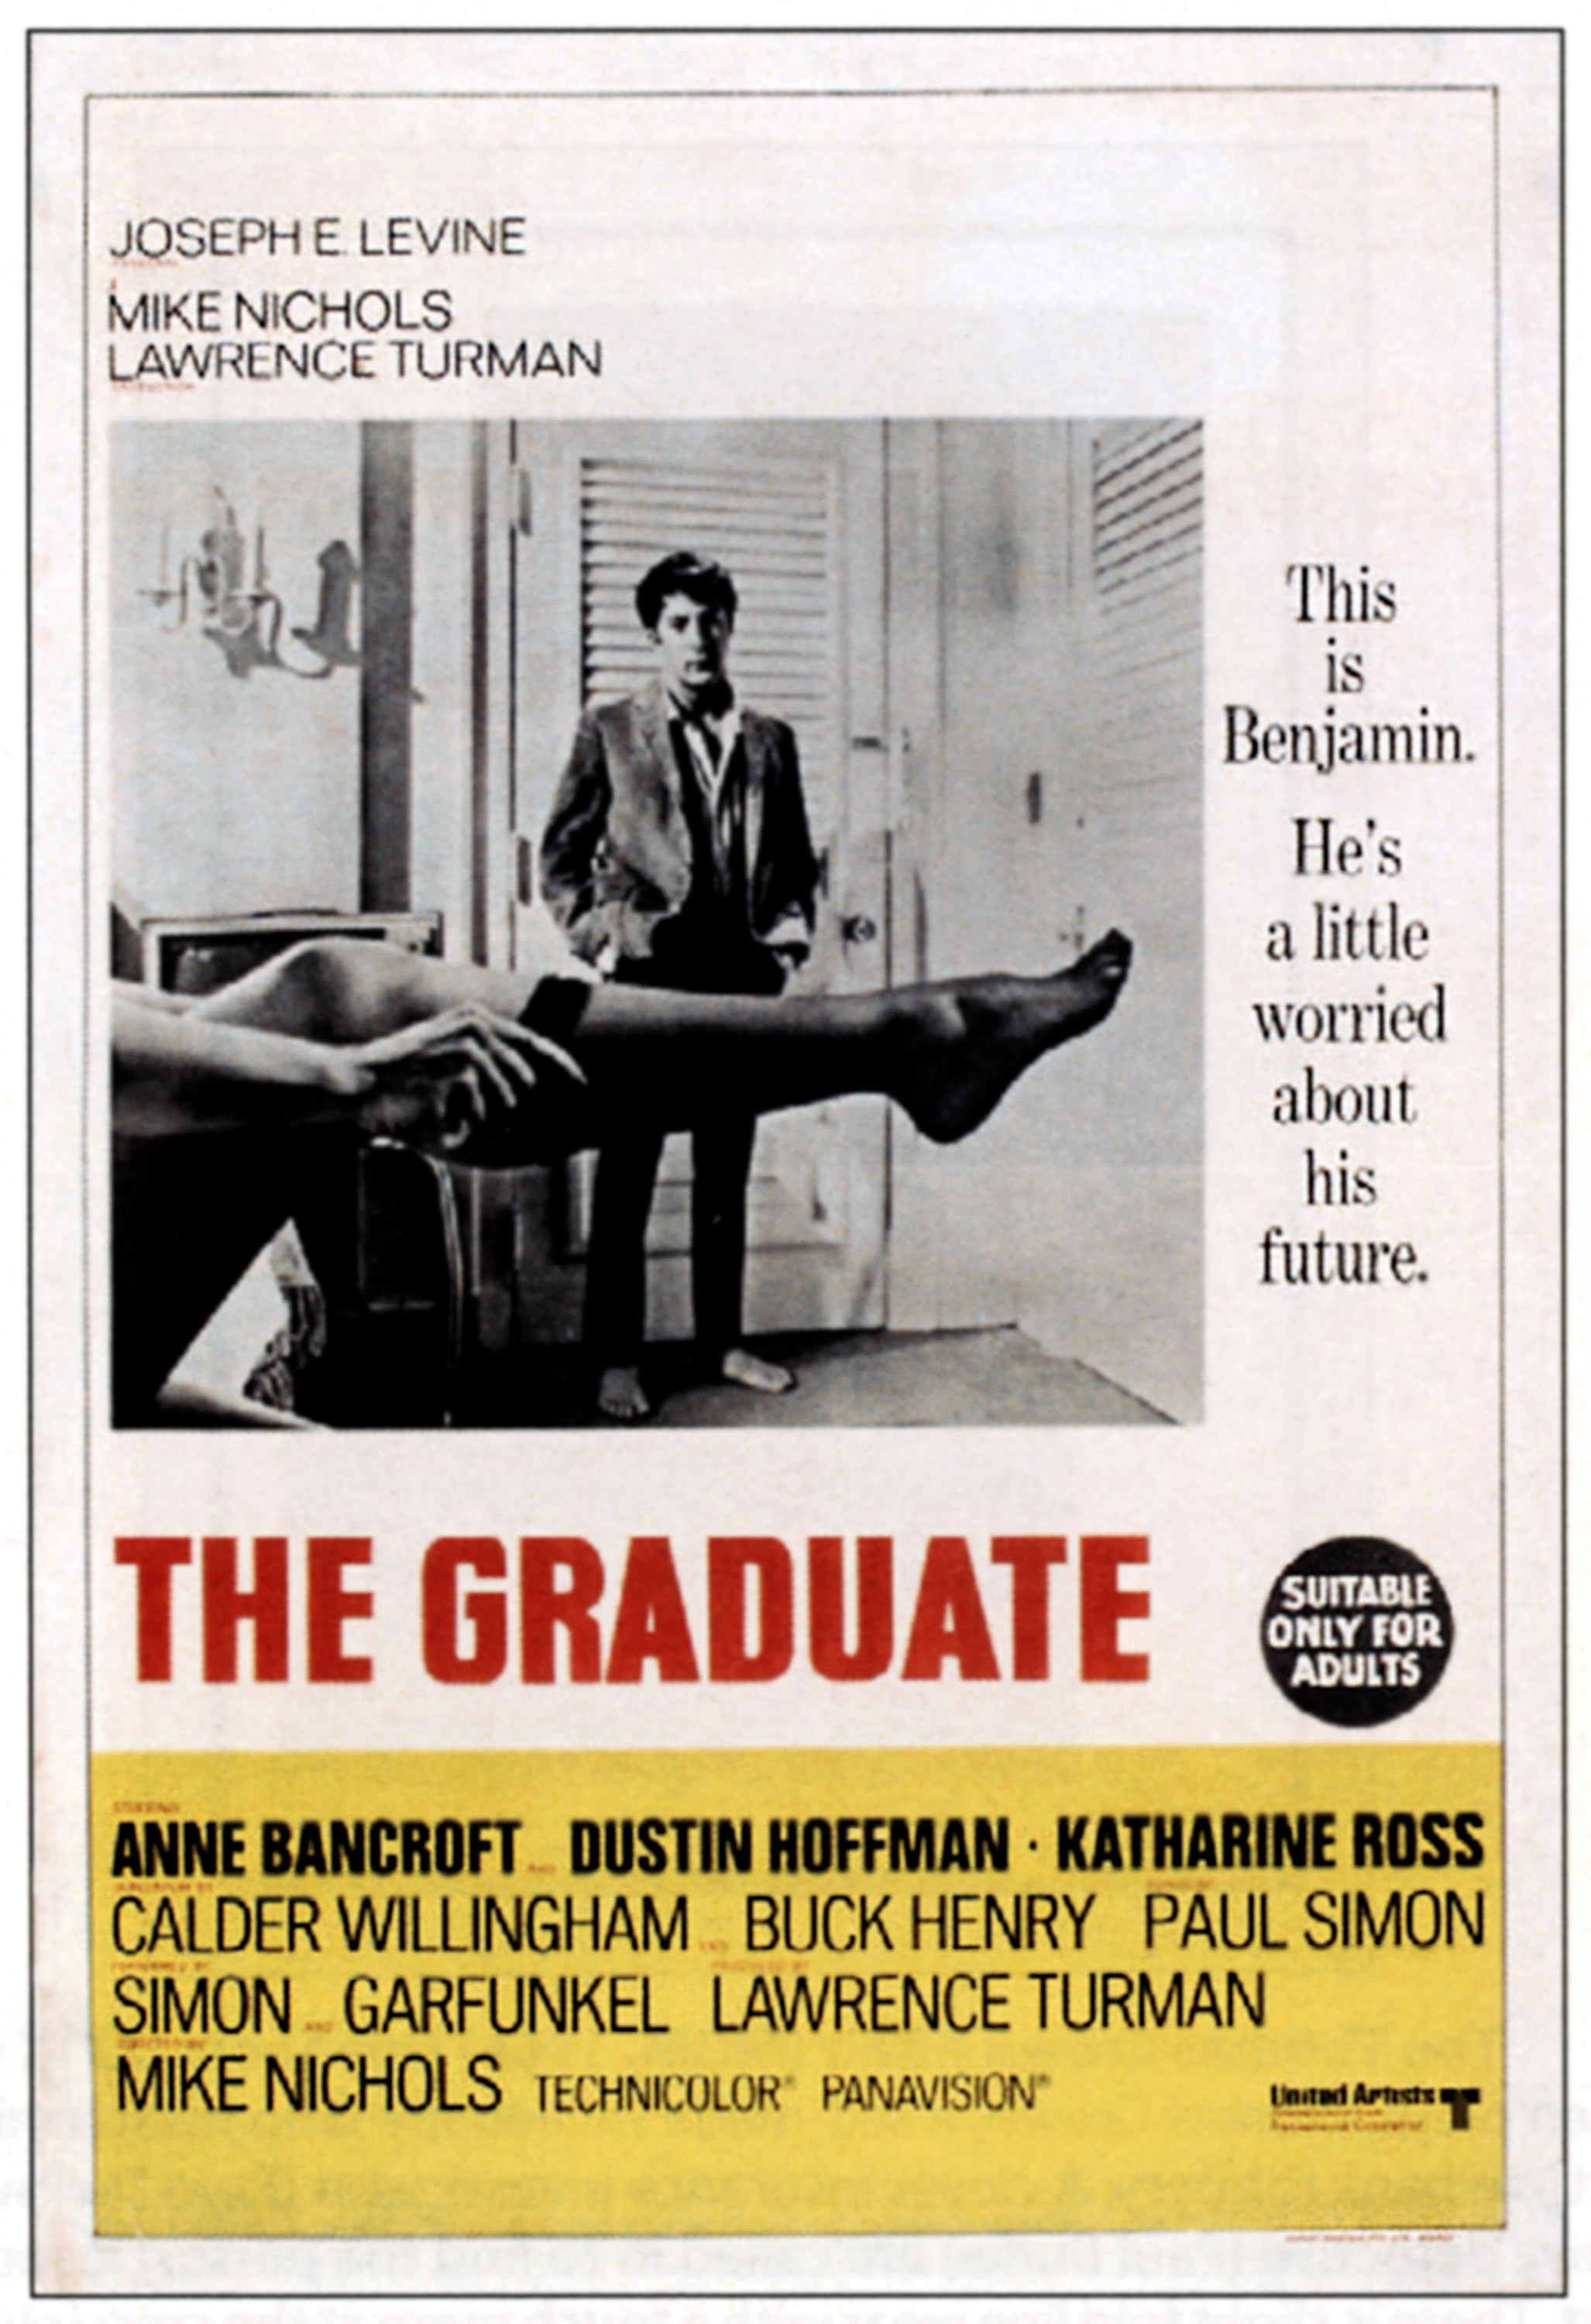 The theatrical poster for &quot;The Graduate&quot;